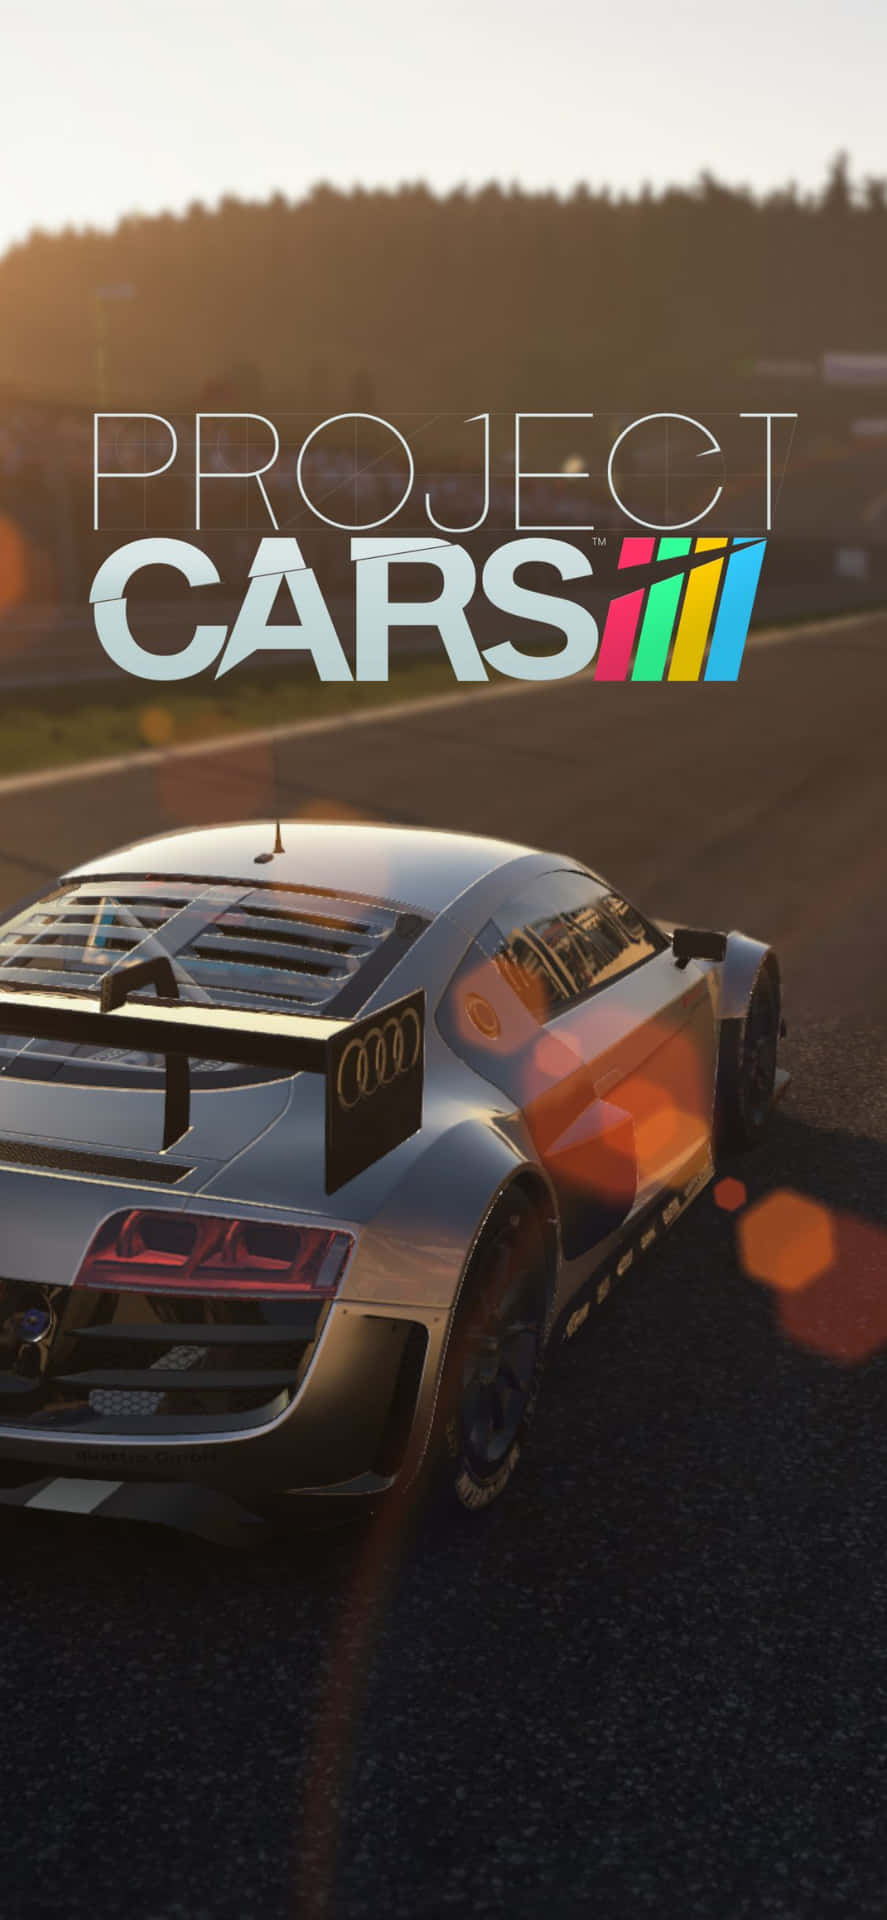 Download the stunning Iphone Xs Project Cars wallpaper for free